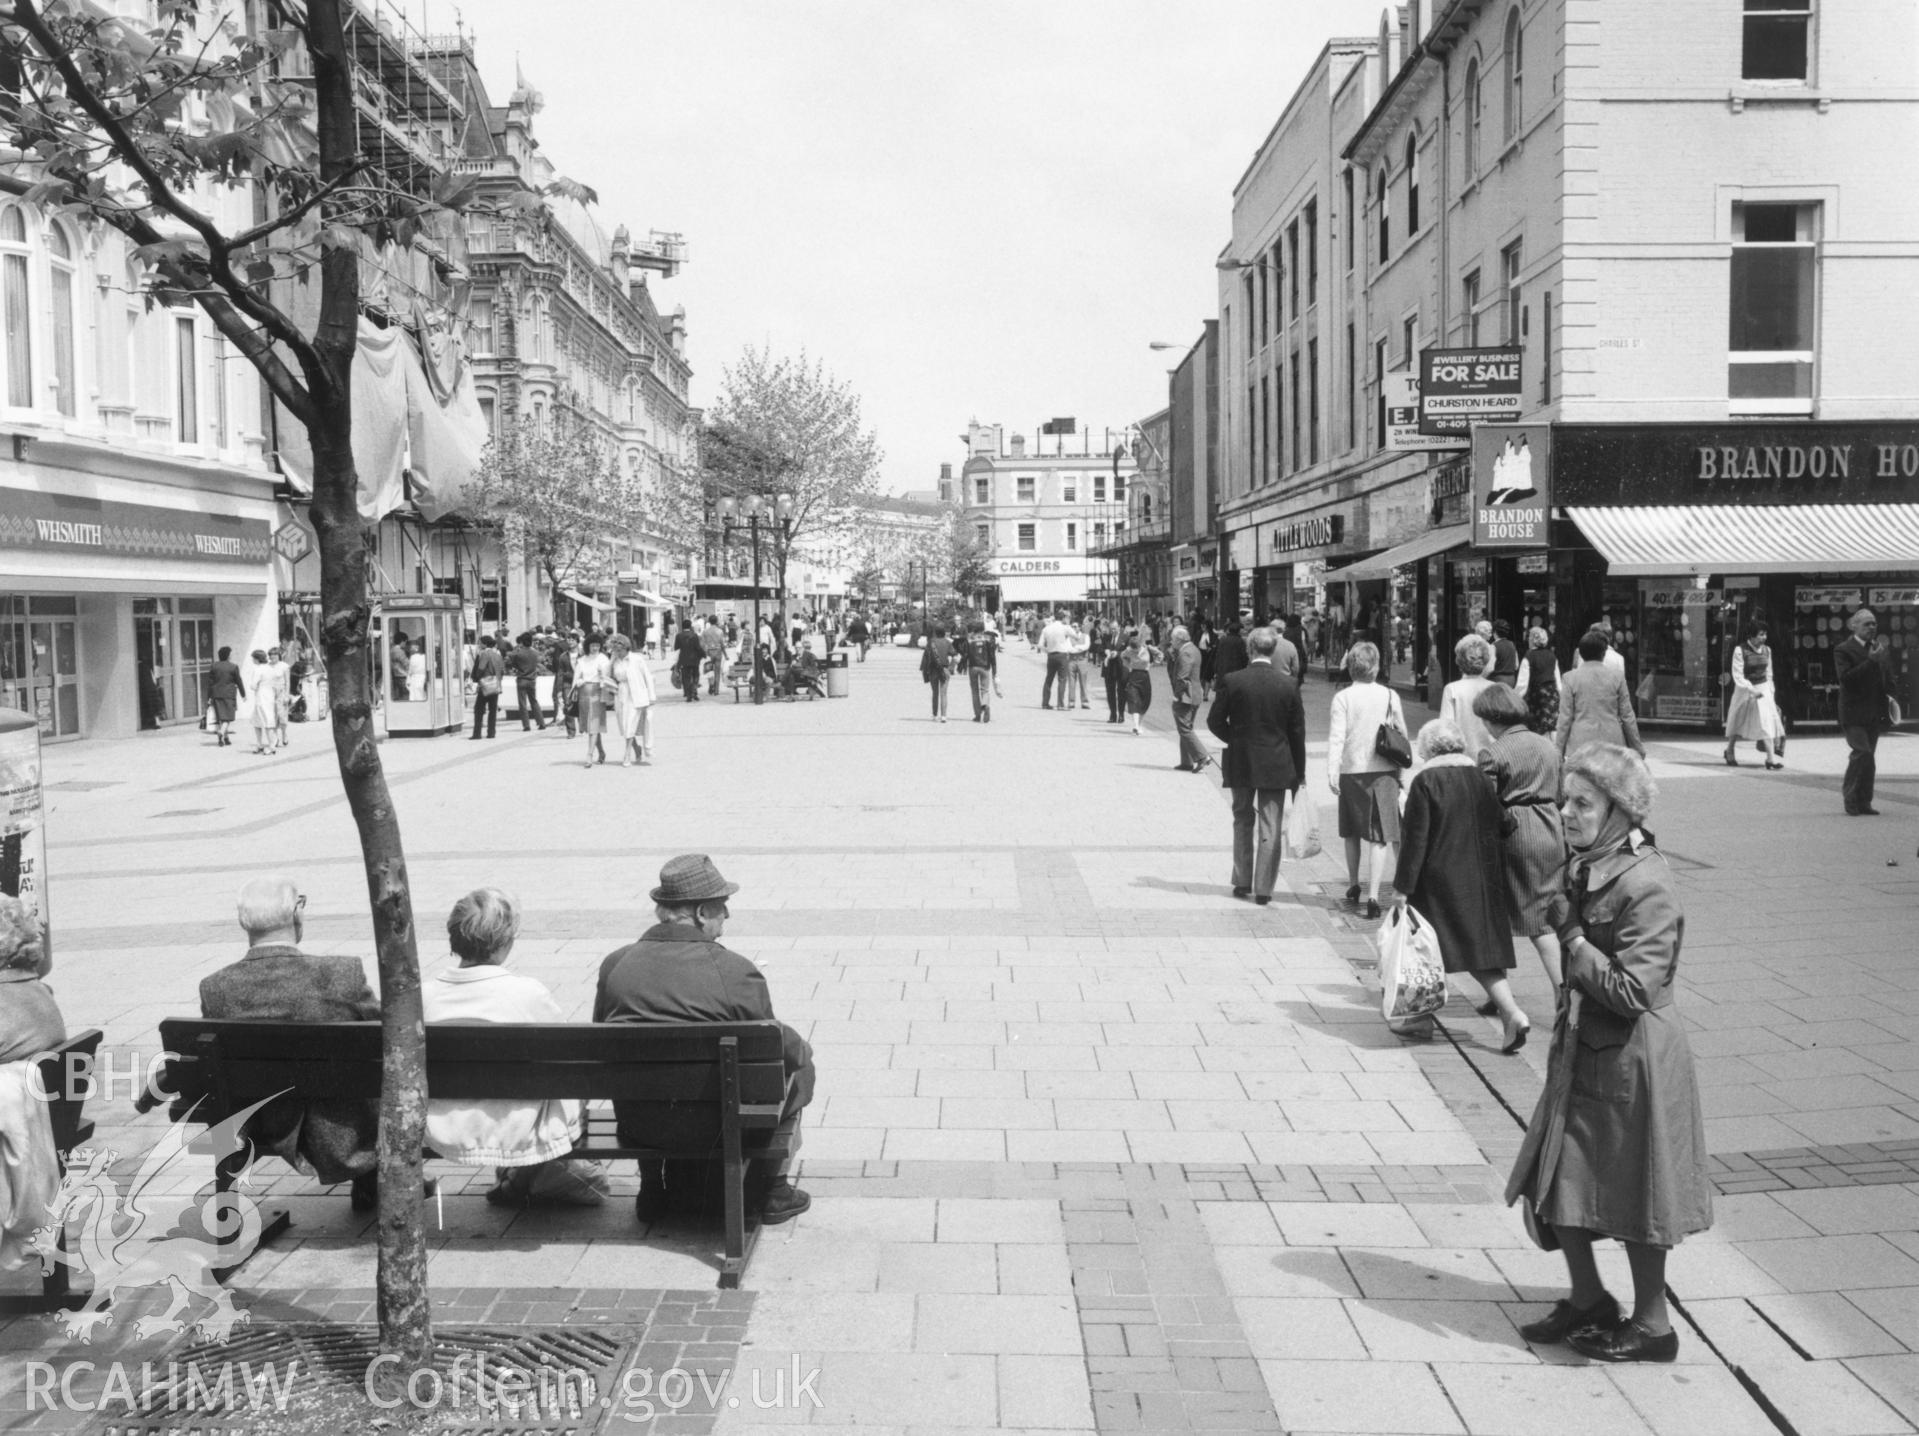 1 b/w print showing St Davids Centre, Cardiff (pedestrianised area), collated by the former Central Office of Information.